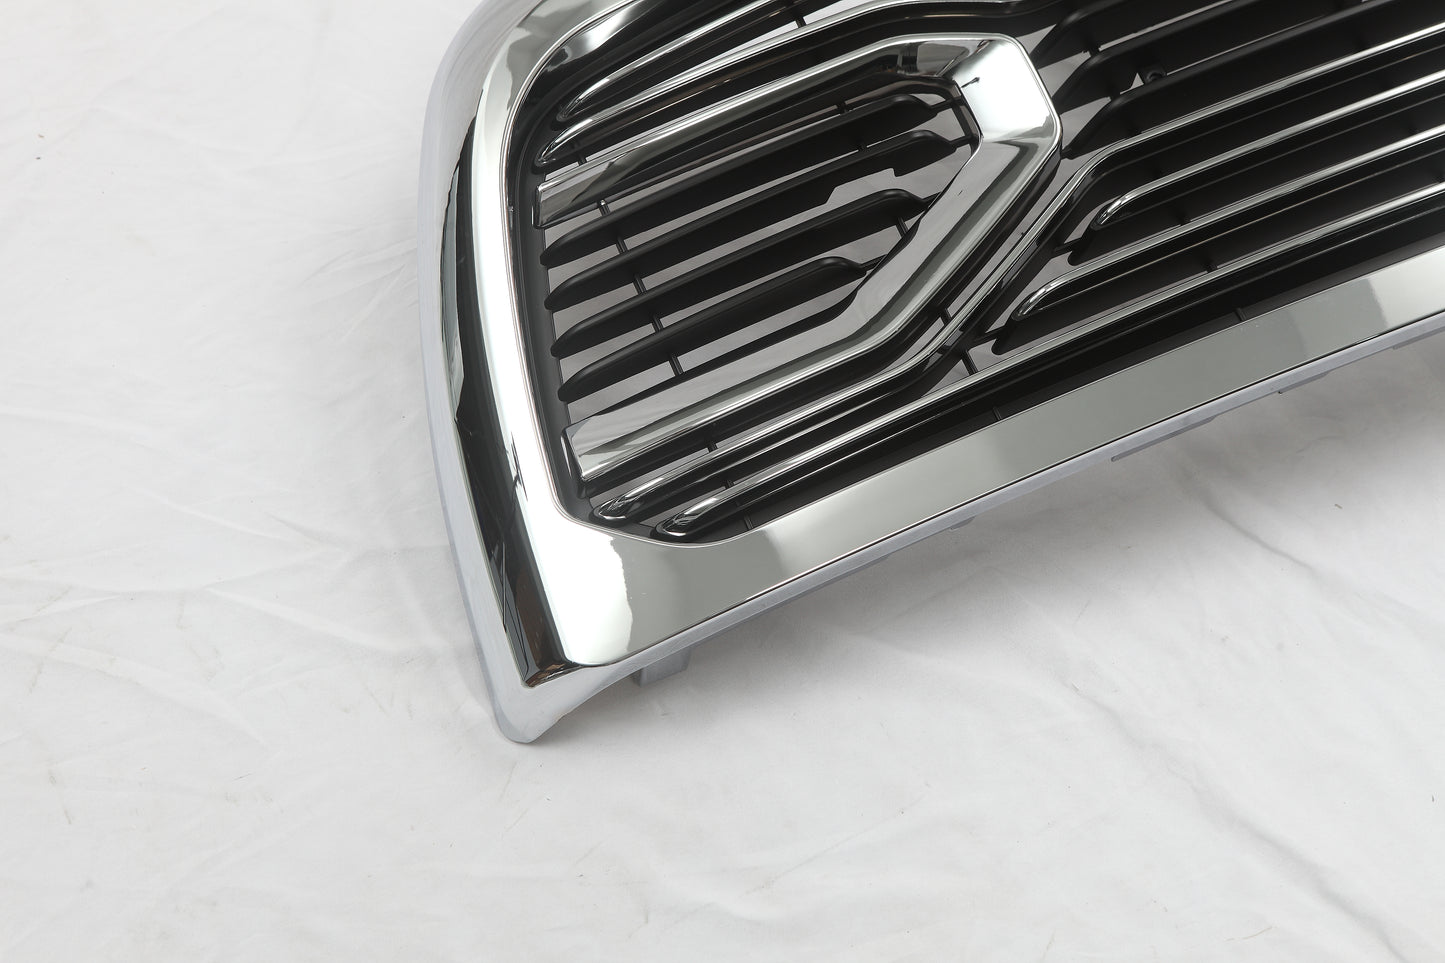 Goodmatchup Grille For 2013 2014 2015 2016 2017 2018 Dodge RAM 2500/3500 Chrome Grill Big Horn Style  With Letters